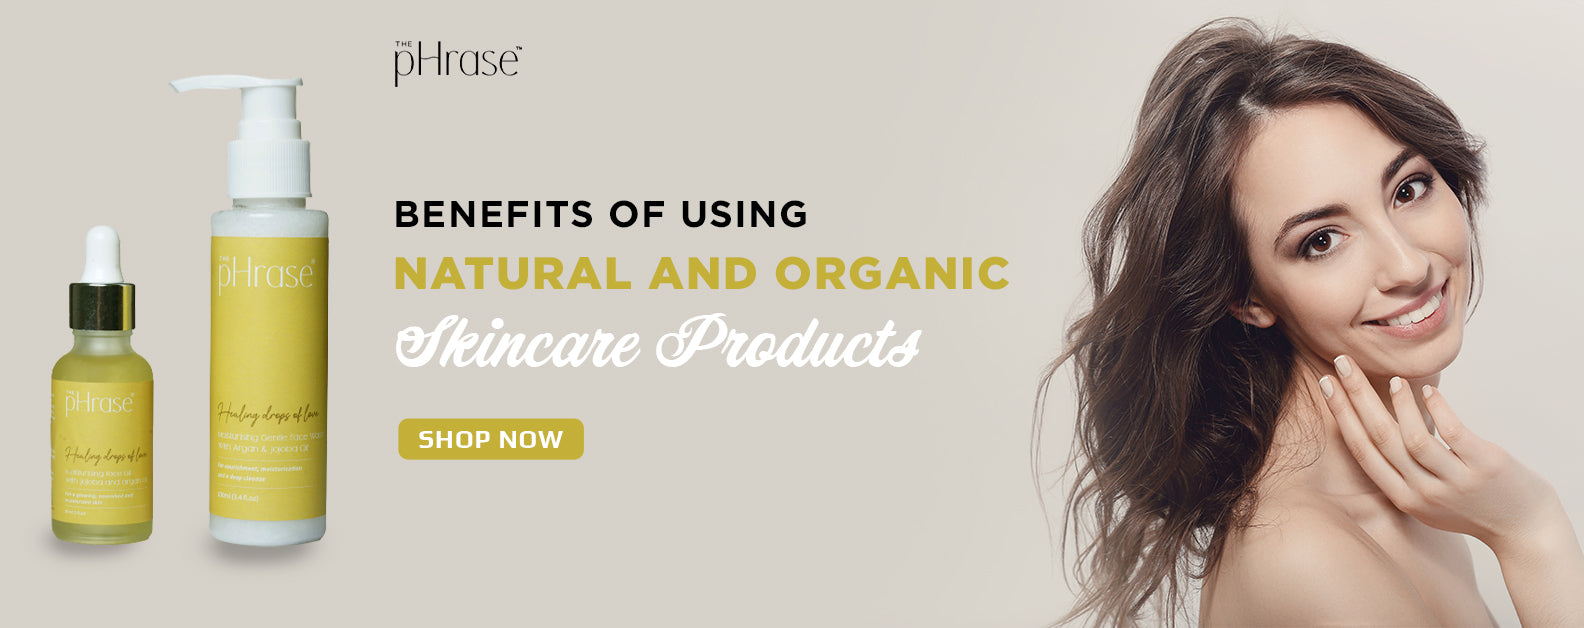 Benefits of Using Natural and Organic Skincare Products - The pHrase